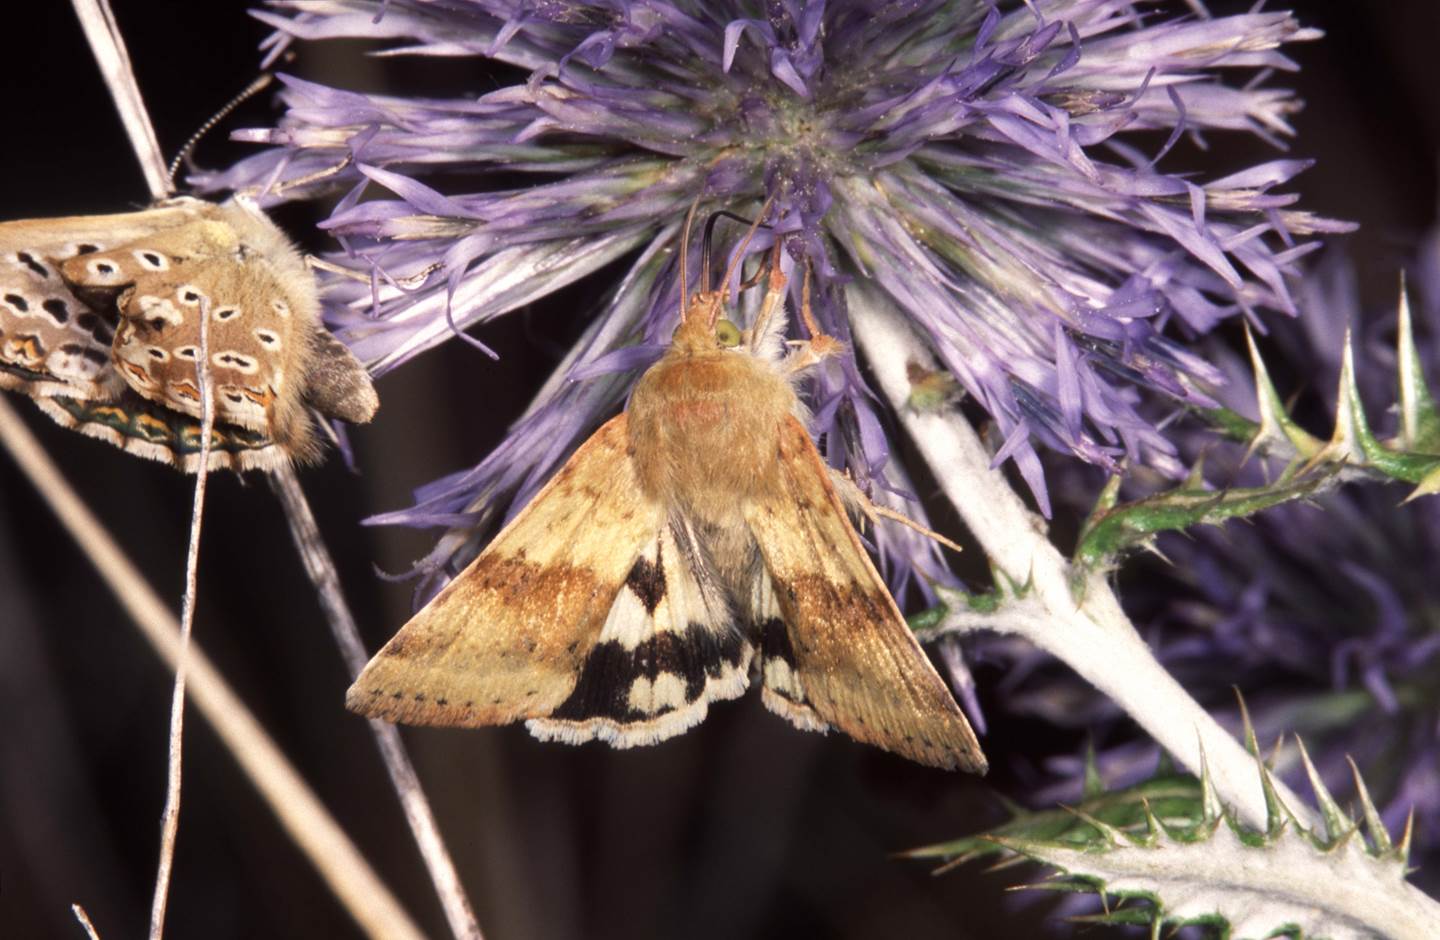 A moth on a flower

Description automatically generated